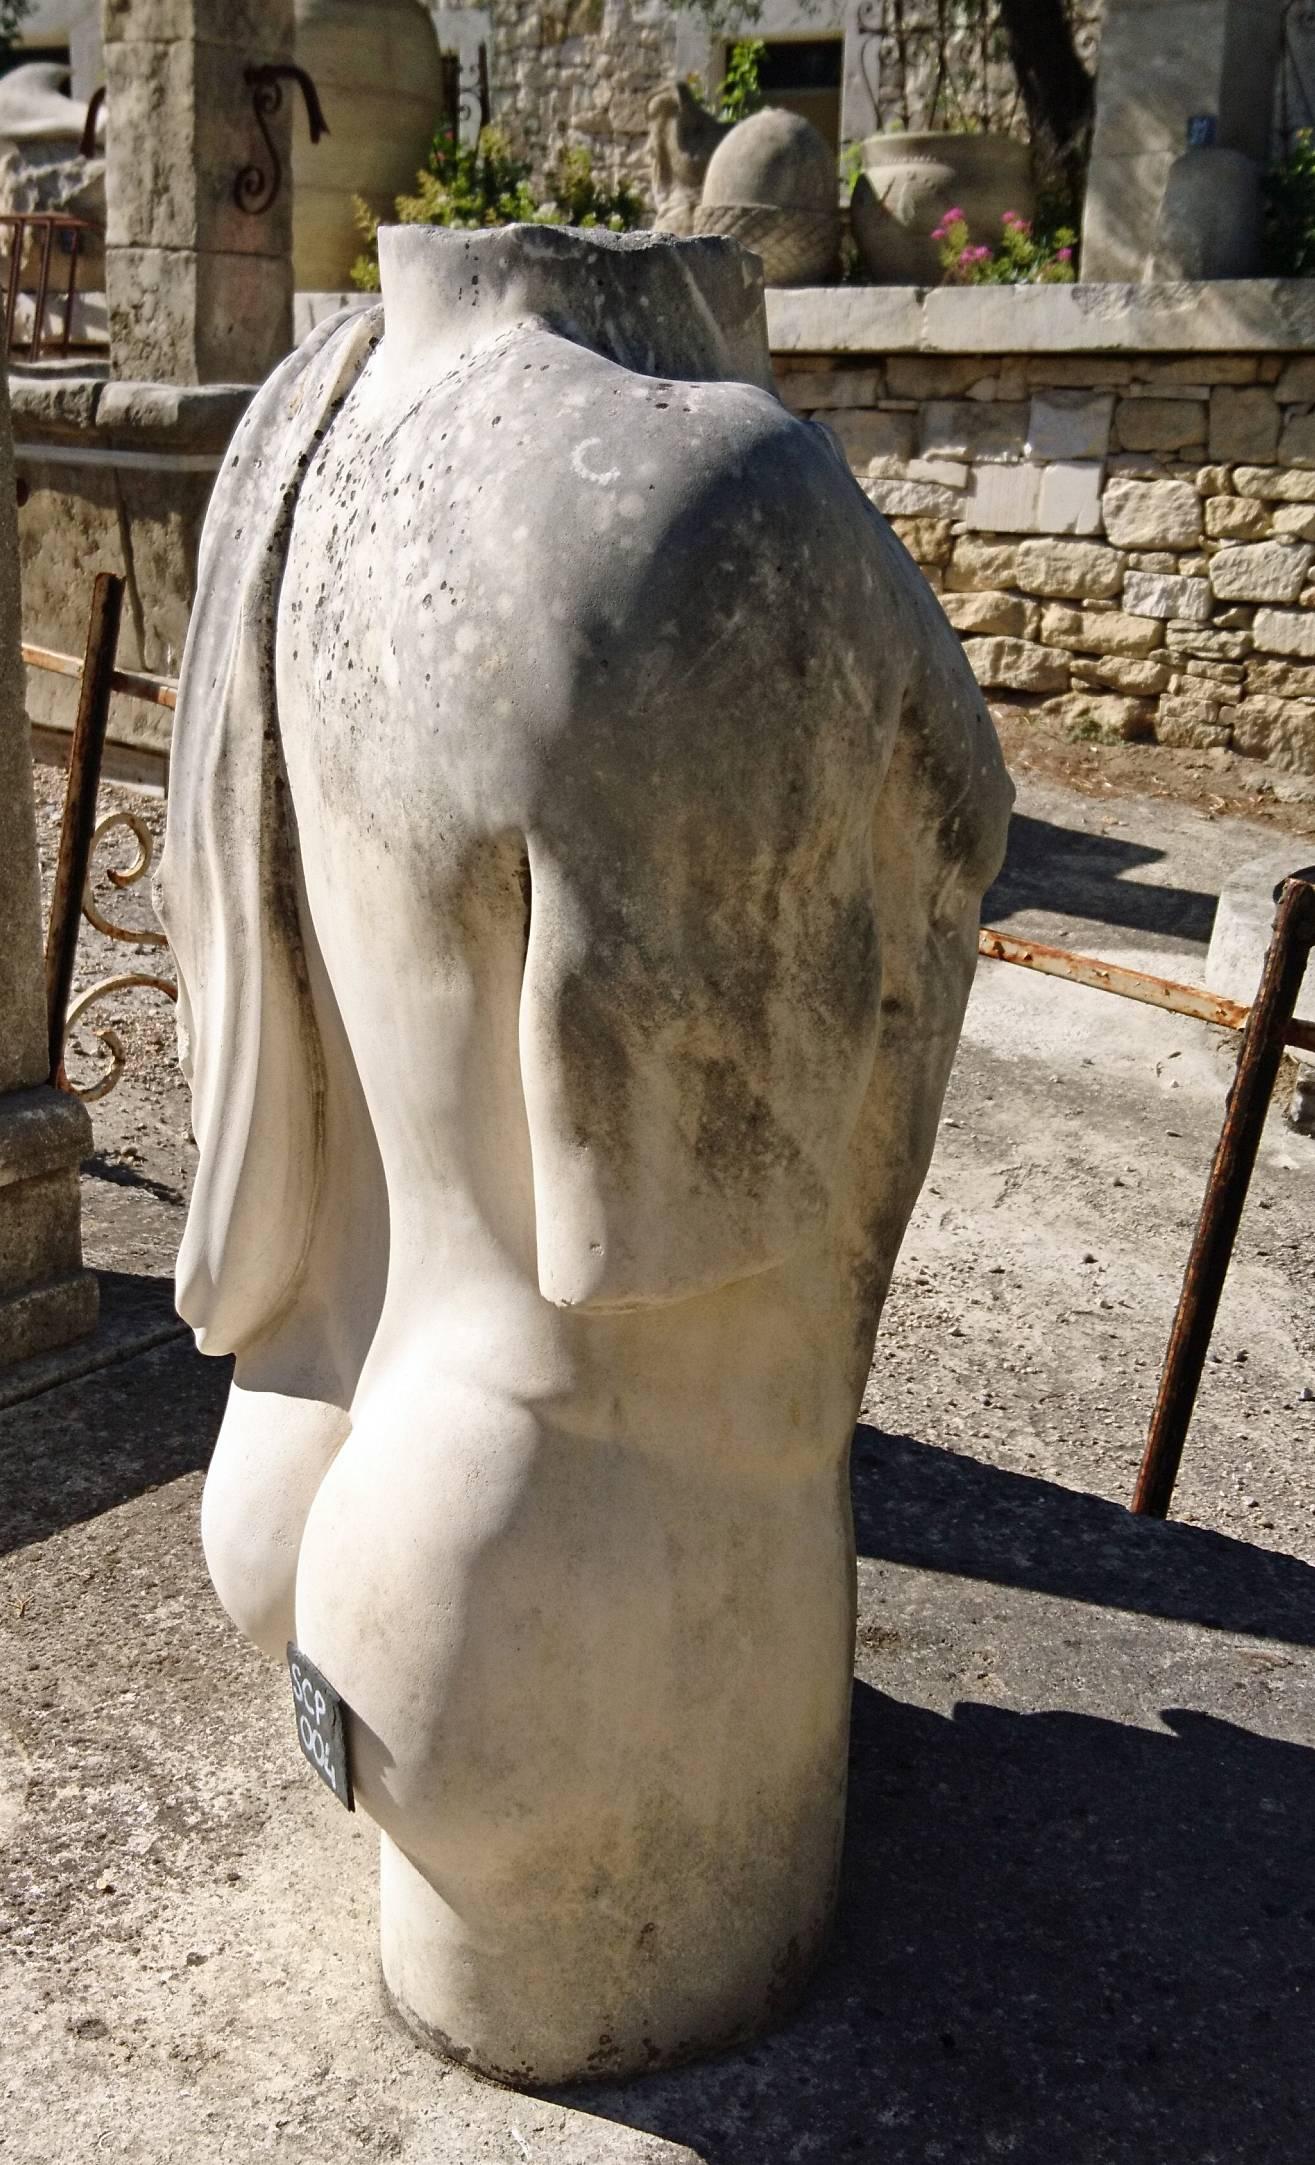 Of Roman inspiration, this garden sculpture has been hand-carved into a white hard natural stone. Nicely weathered by time, this stone statue represents a nude male's torso.

Ideal to decorate your garden with a unique and original stone statue!